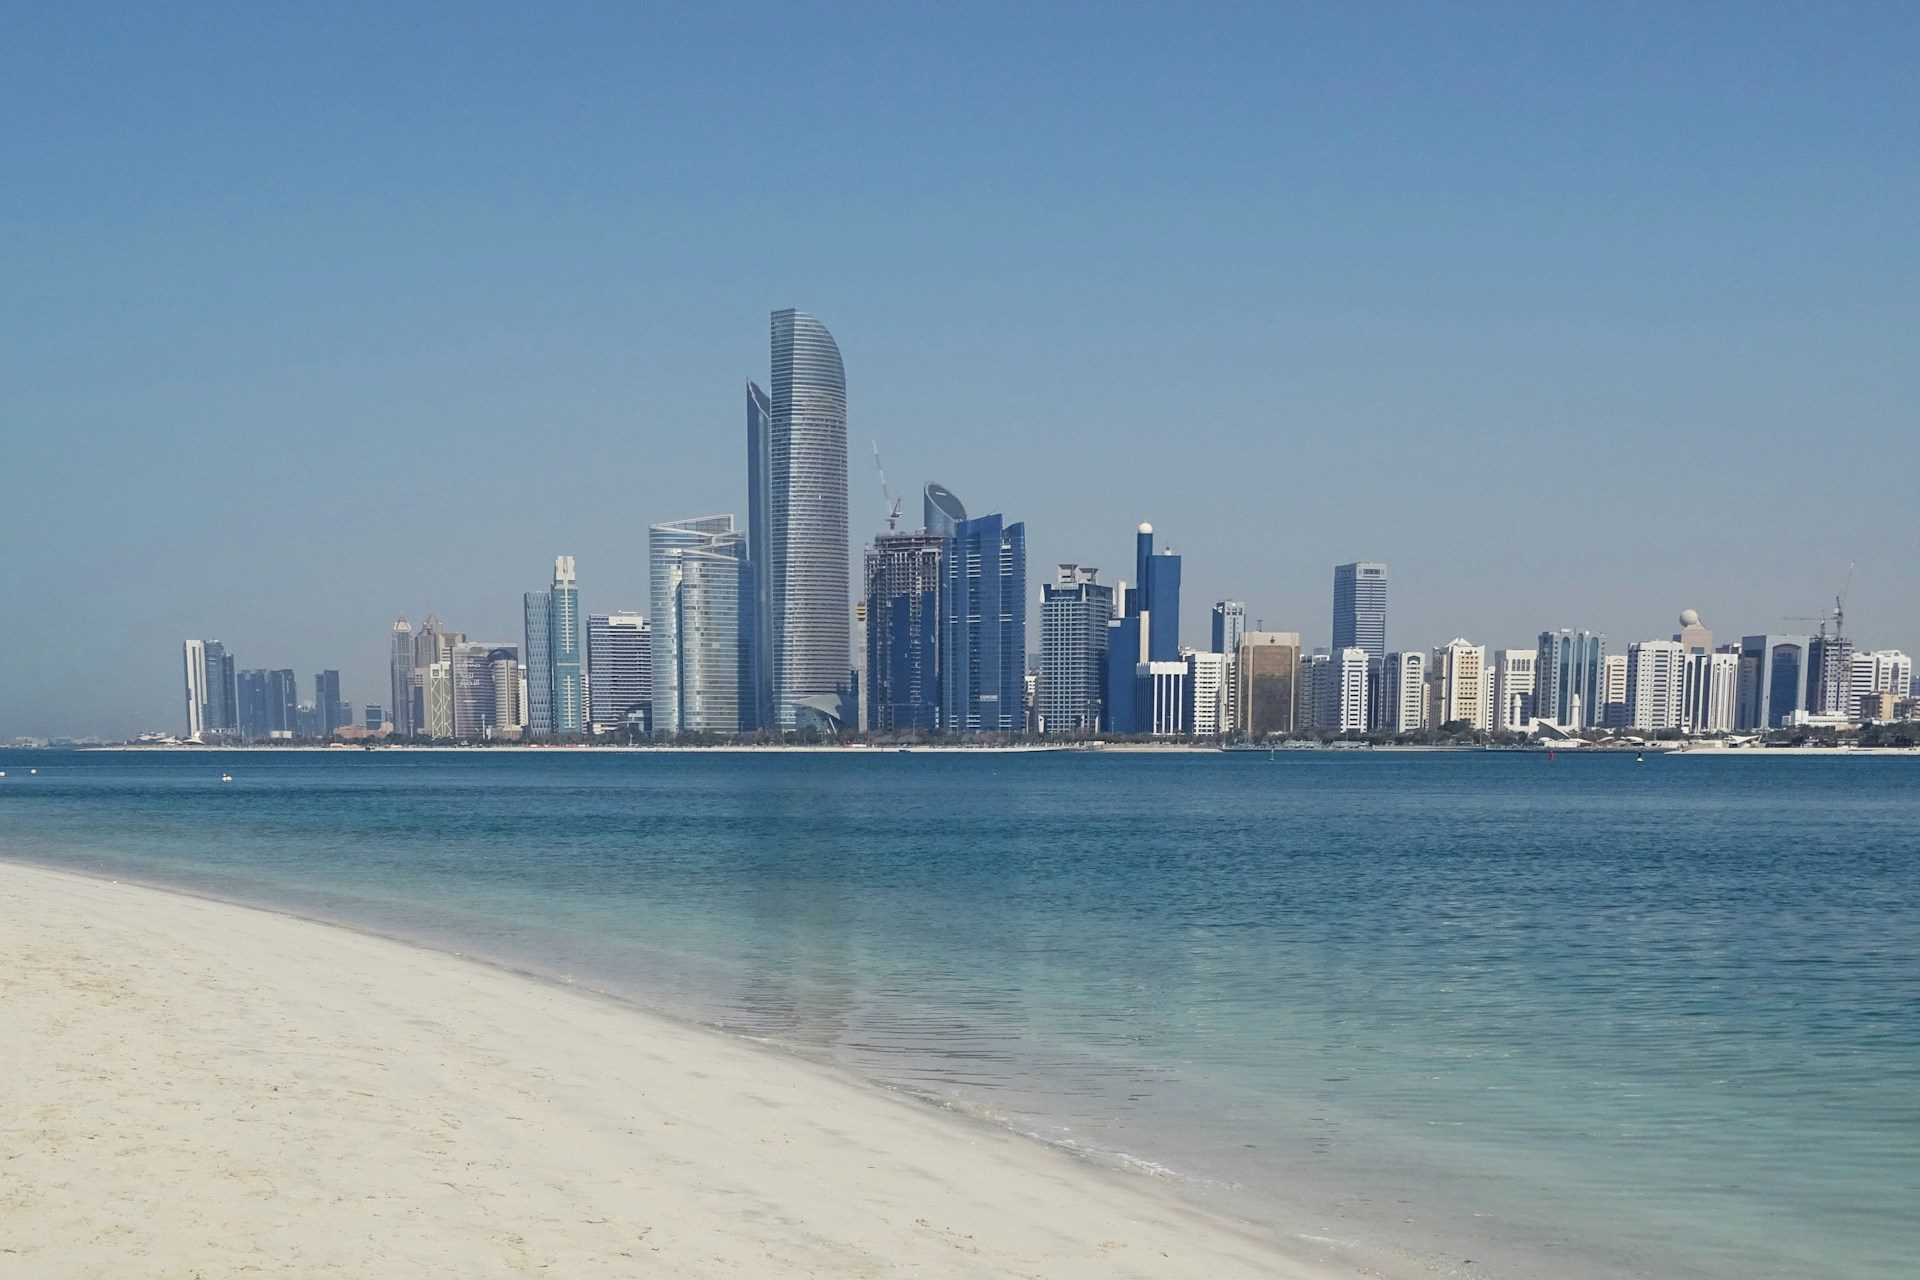 View of skyscrapers in central Abu Dhabi, with a blue body of water and white sands in front.